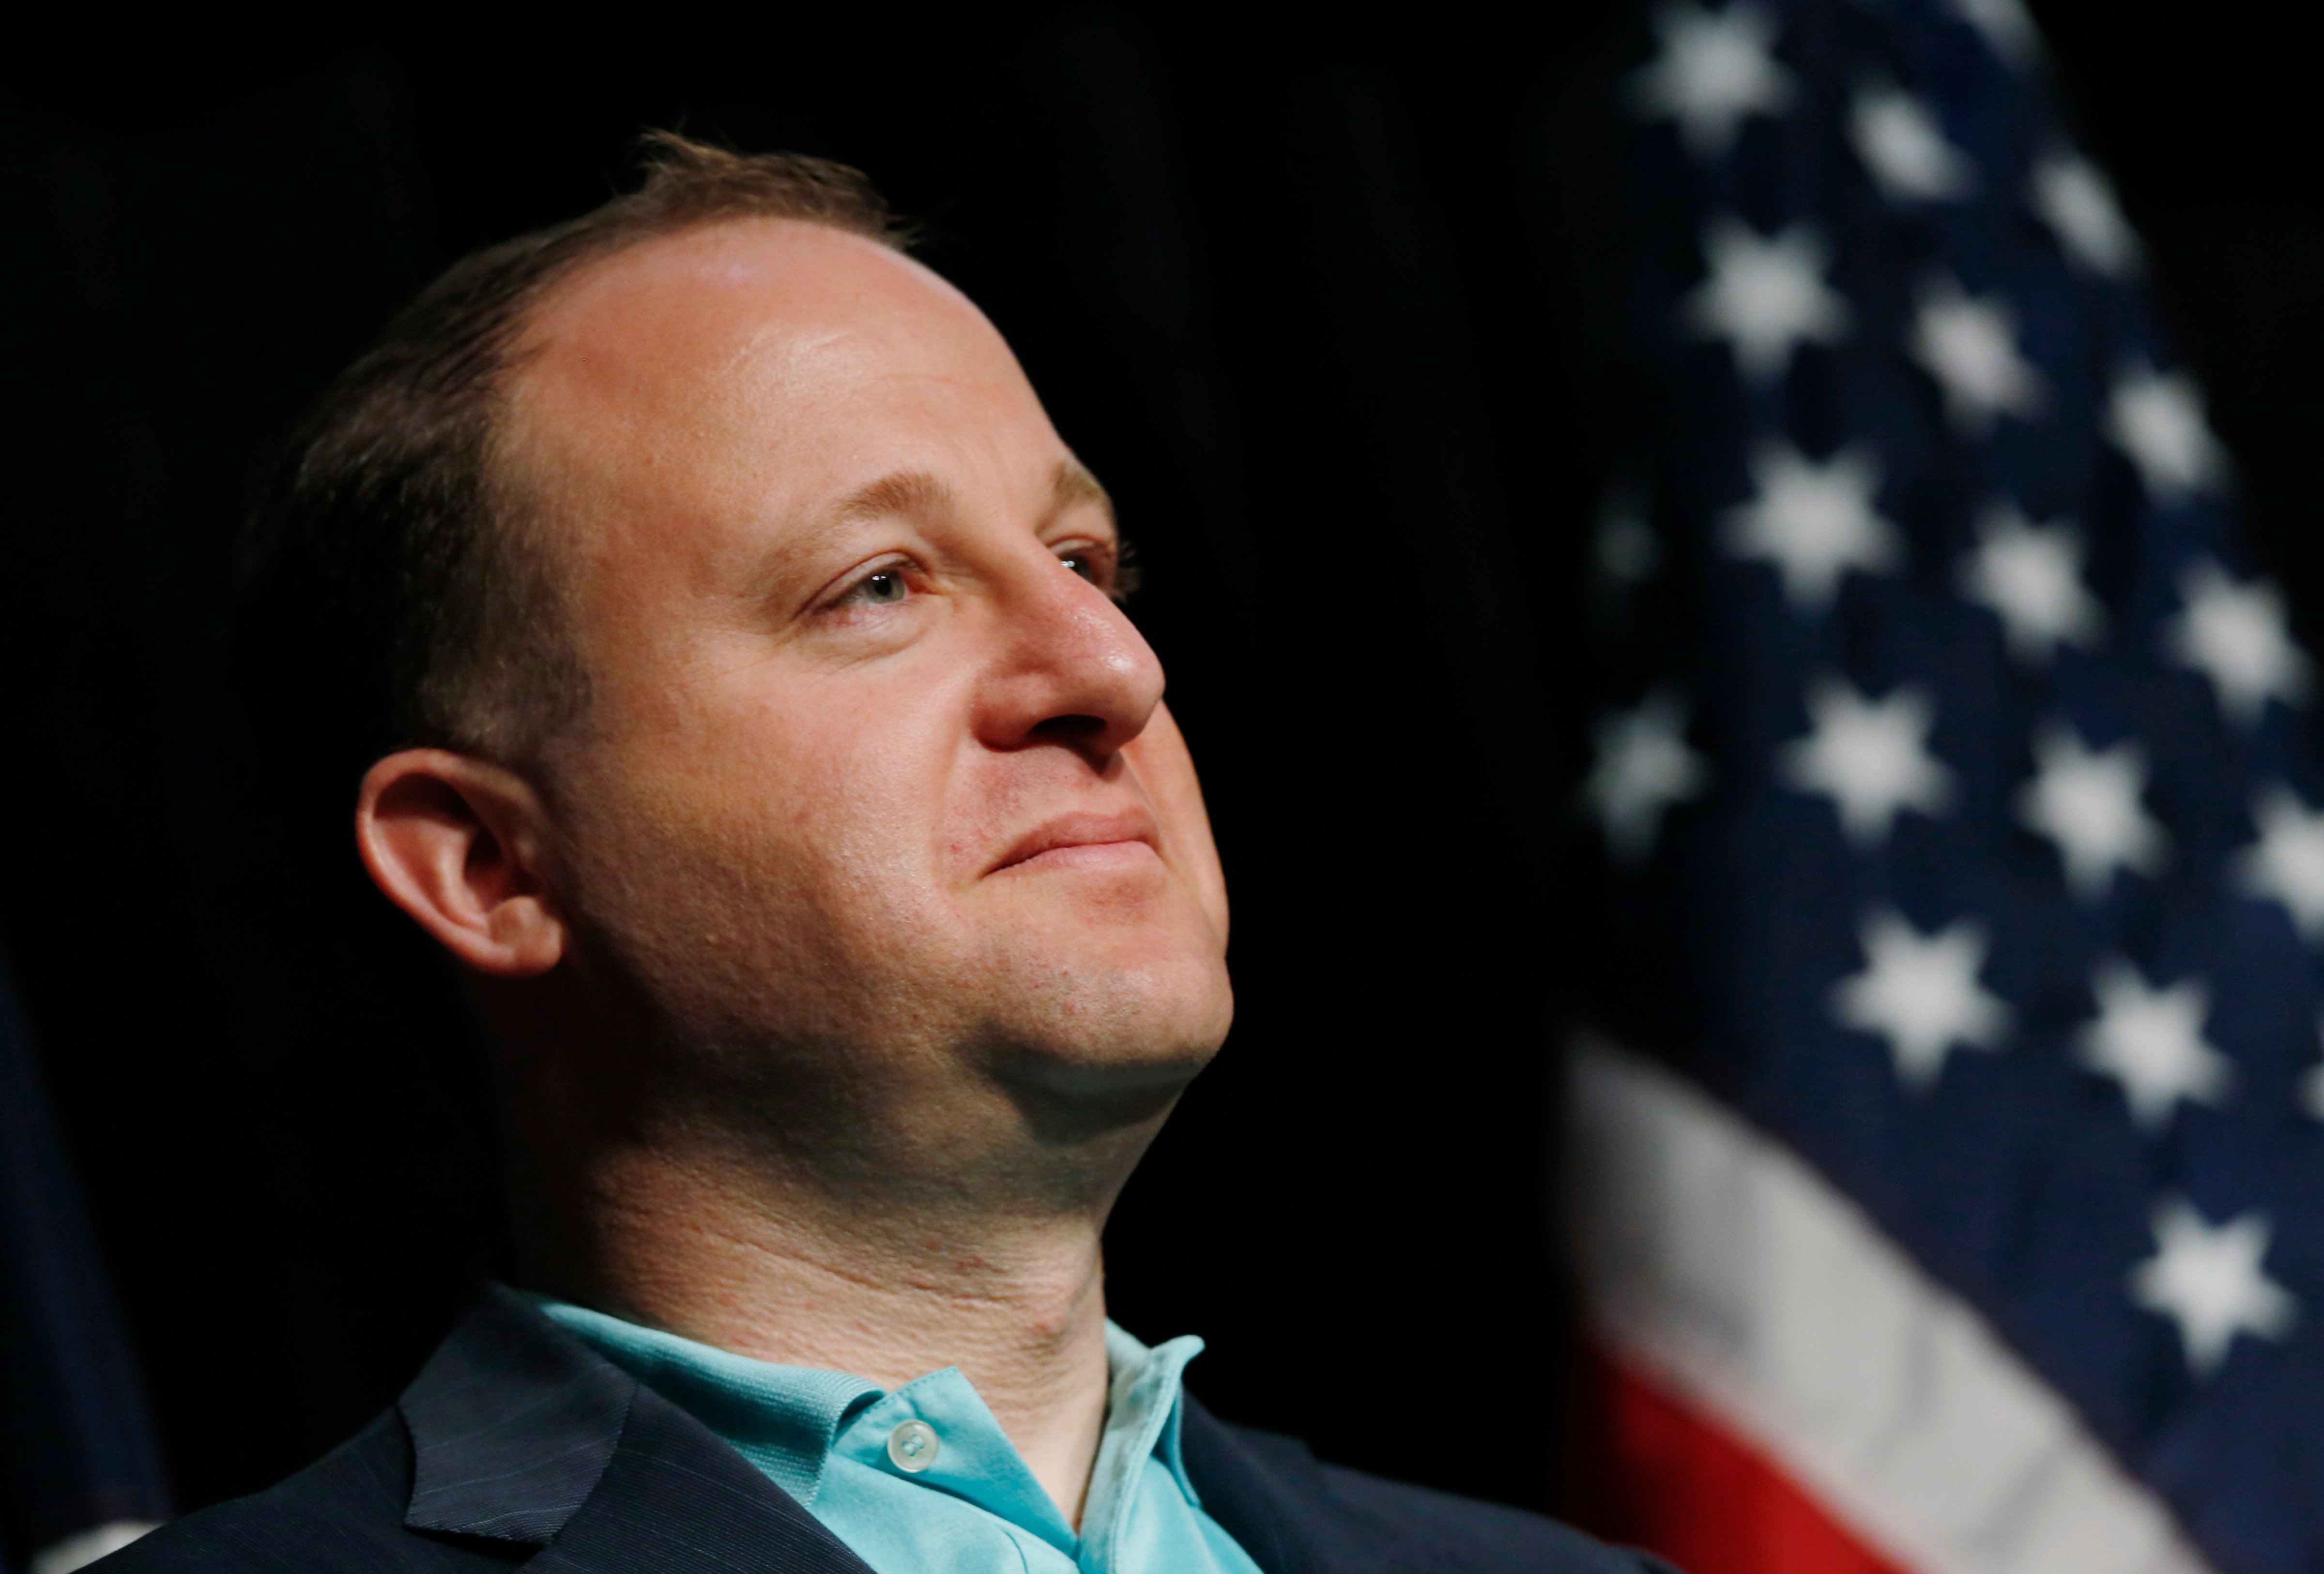 Rep. Jared Polis, D-Colo., looks on during the Colorado Democratic Party's State Assembly in Denver on April 12, 2014 (David Zalubowski—AP)